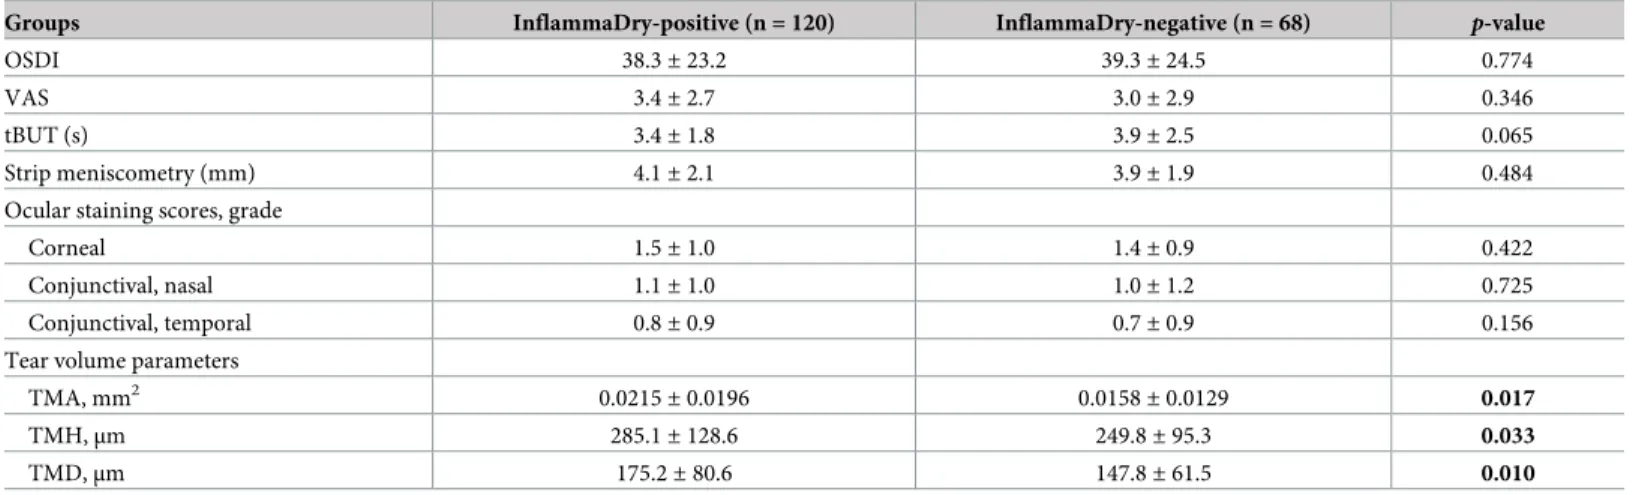 Table 3. Comparisons of clinical characteristics between InflammaDry-positive and -negative groups of dry eye patients.